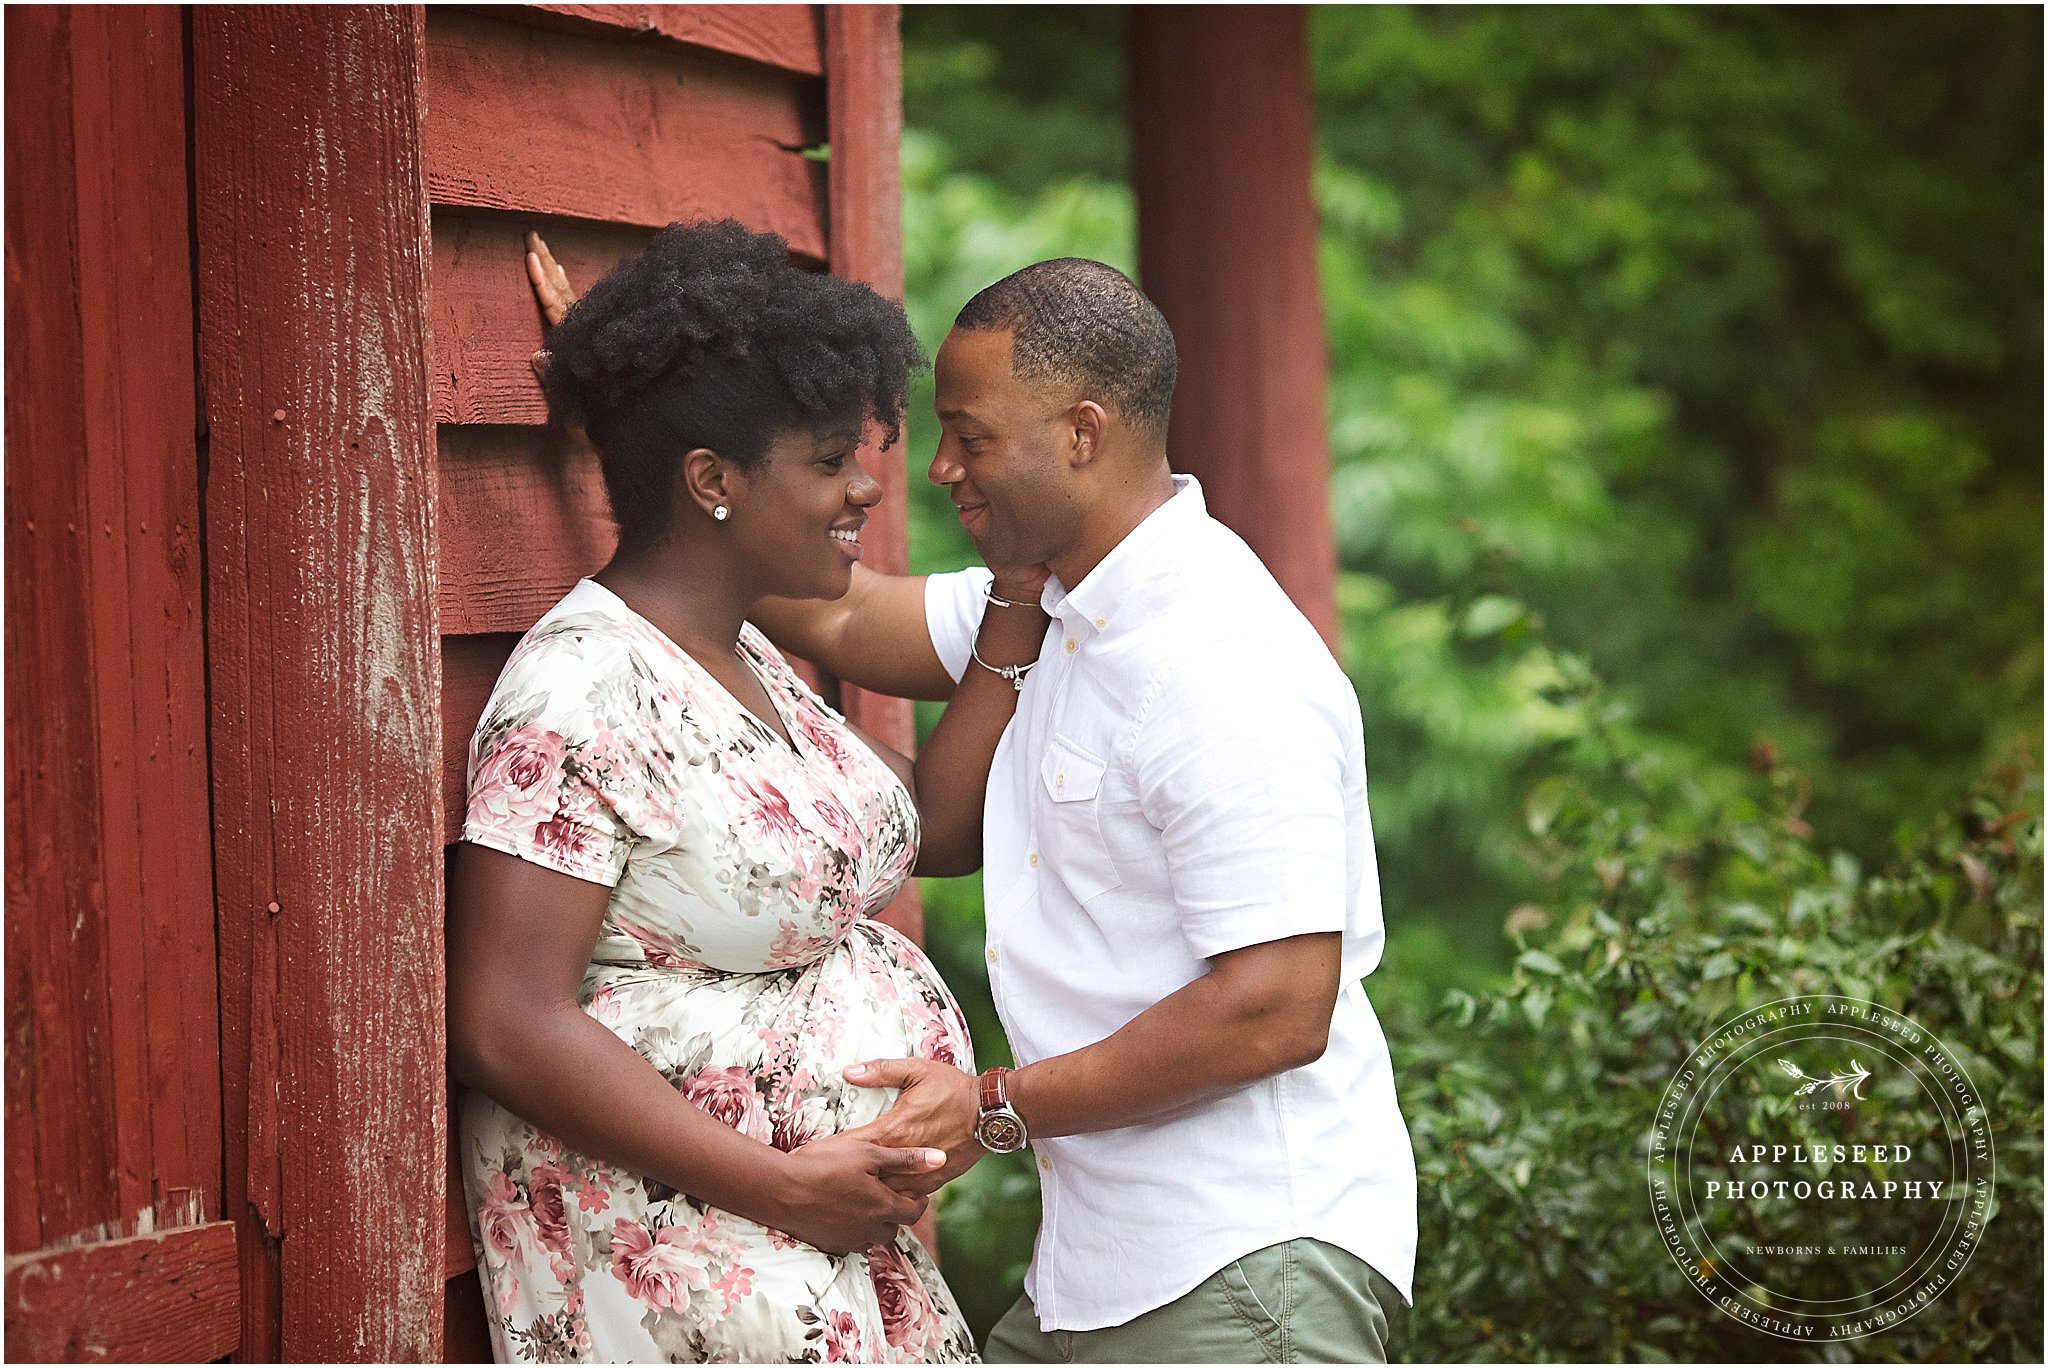 The Brown Family | Atlanta Maternity Photographer | Appleseed Photography